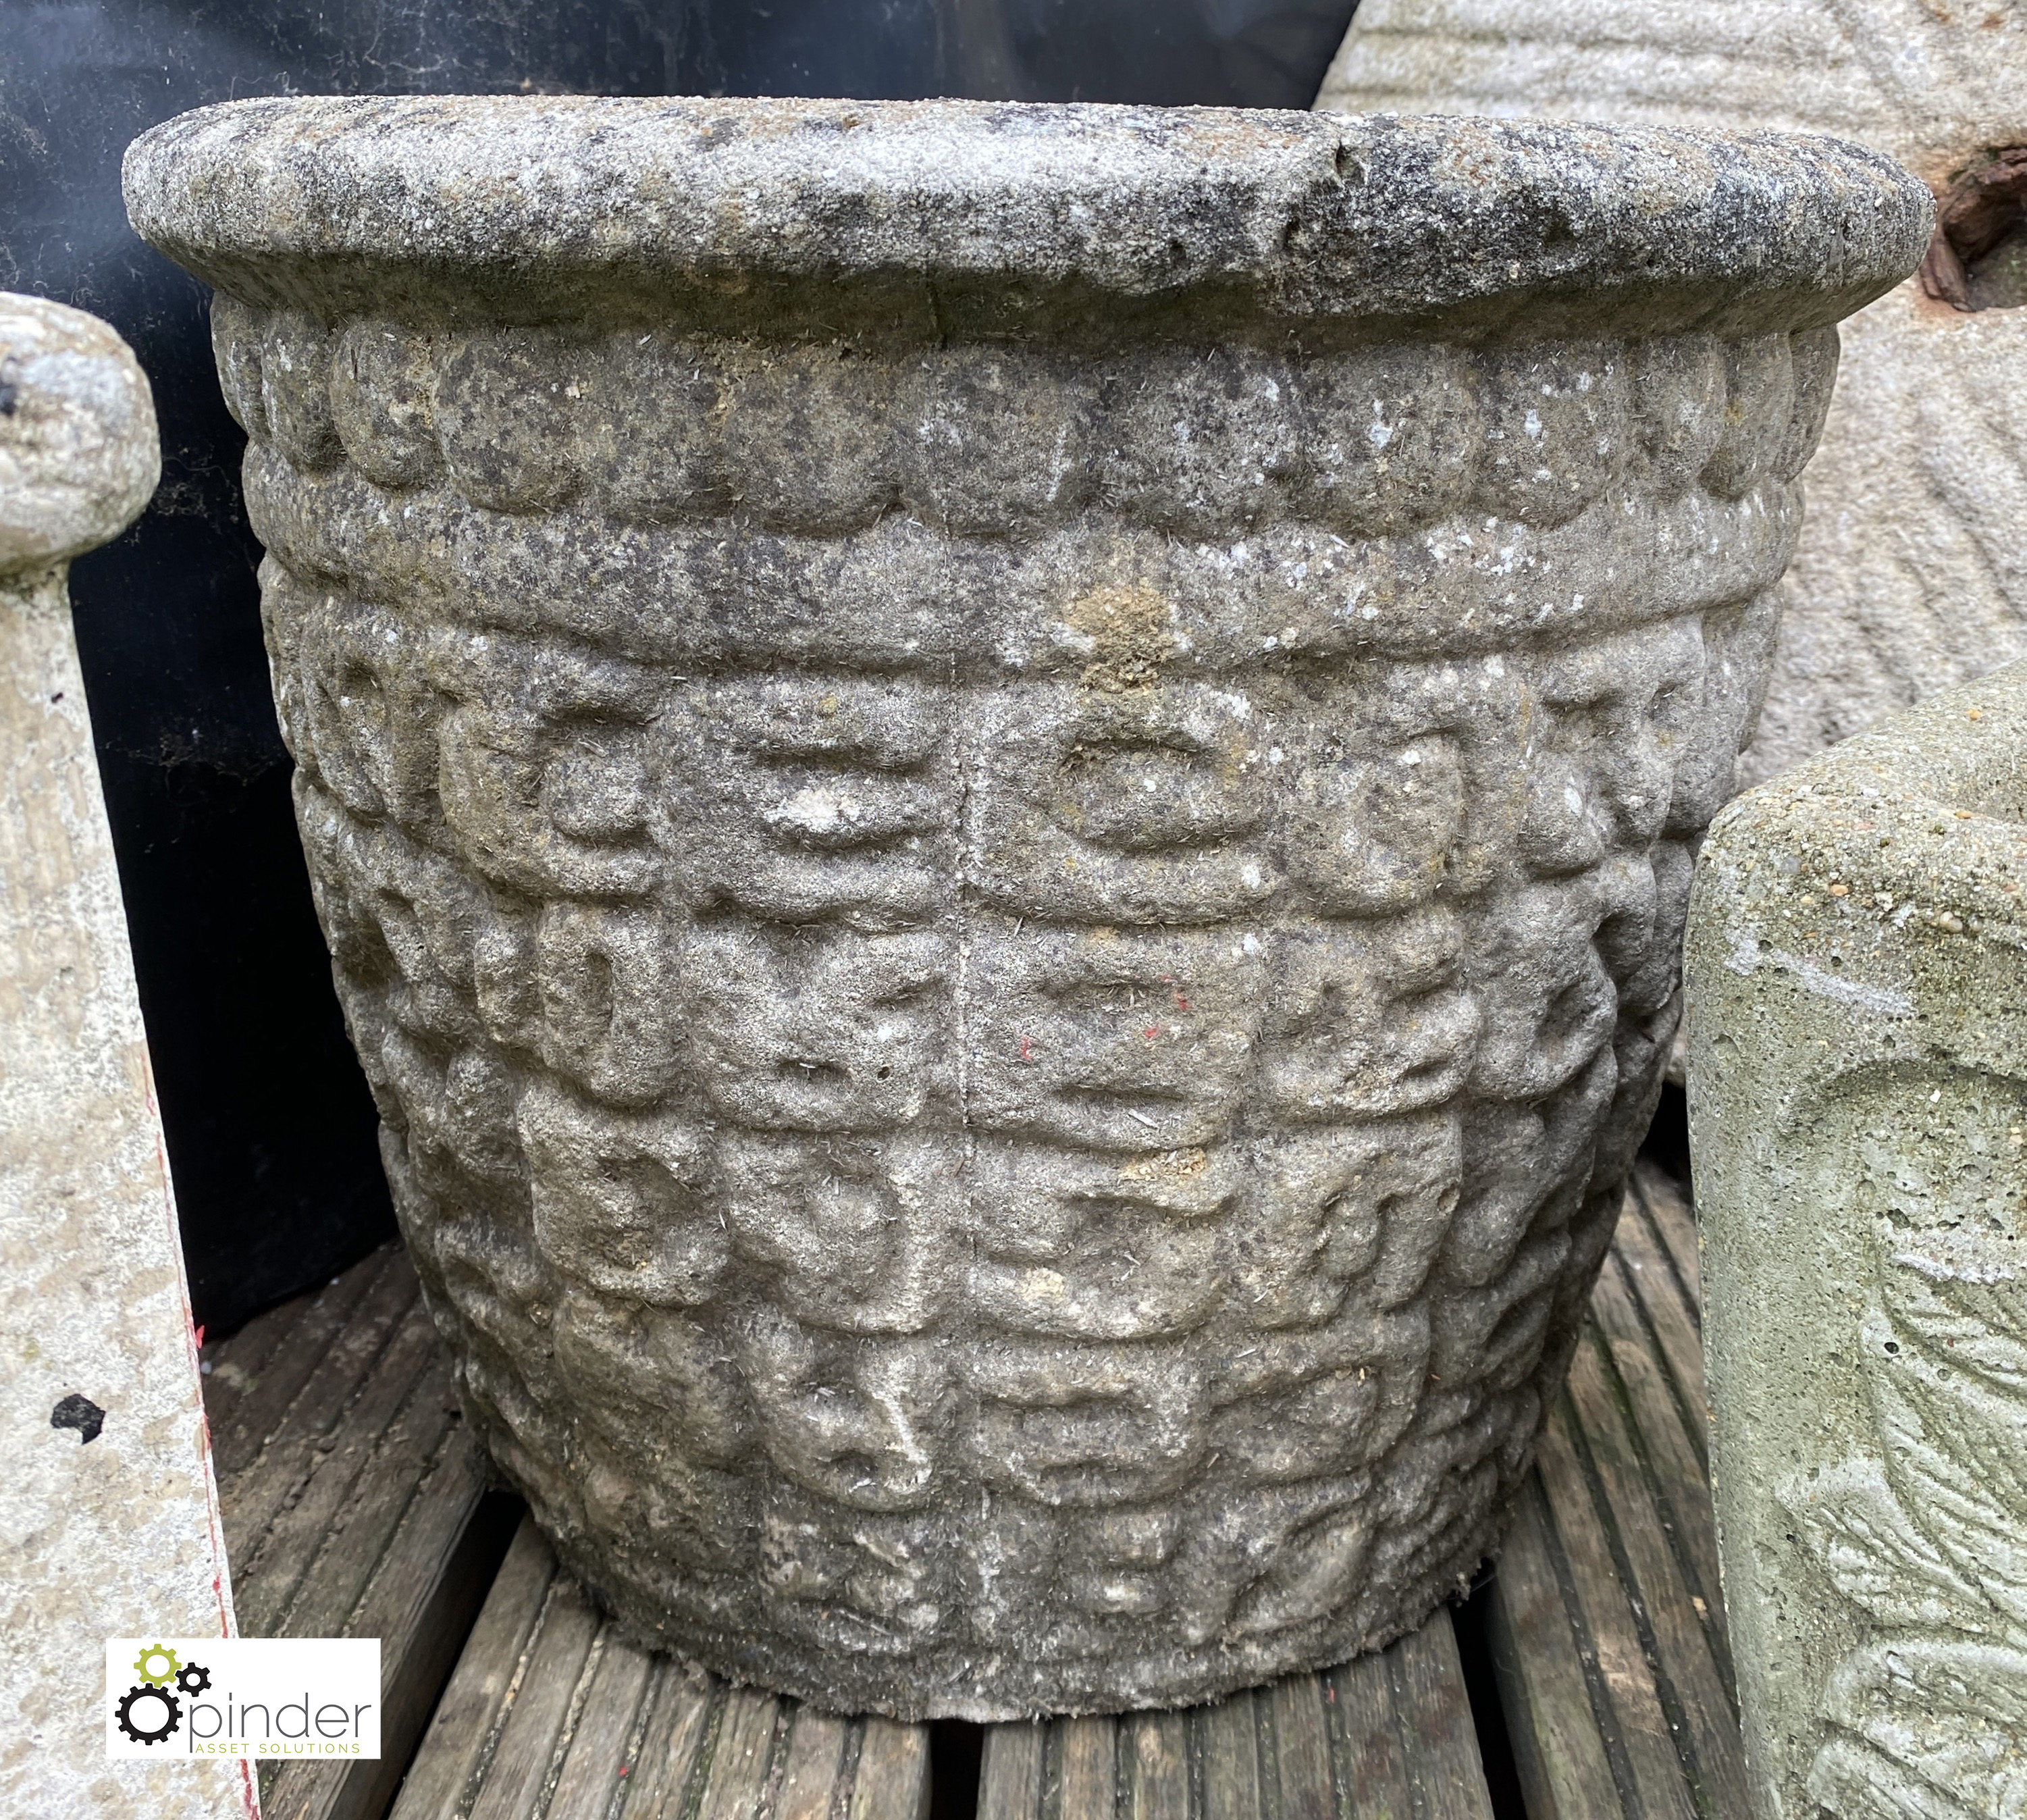 A round reconstituted stone Garden Planter, with rustic pattern, 14in high x 17in diameter